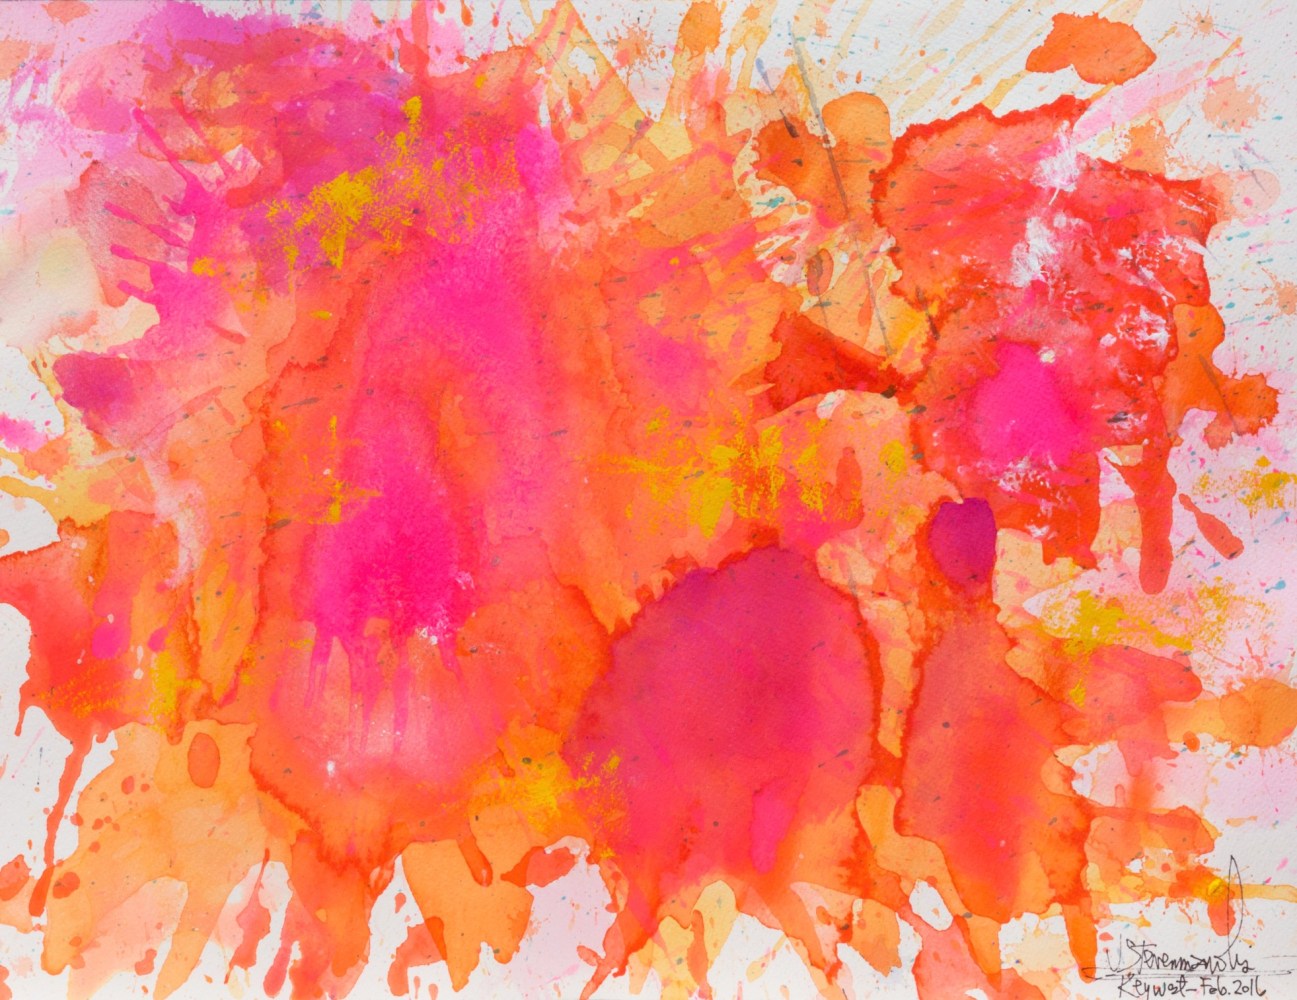 J. Steven Manolis, Flamingo-Key West, 1832-2016-1216.06, watercolor, gouache and acrylic painting on Arches paper, 12 x 16 inches, Pink and orange Abstract Art, Tropical Watercolor paintings for sale at Manolis Projects Art Gallery, Miami, Fl